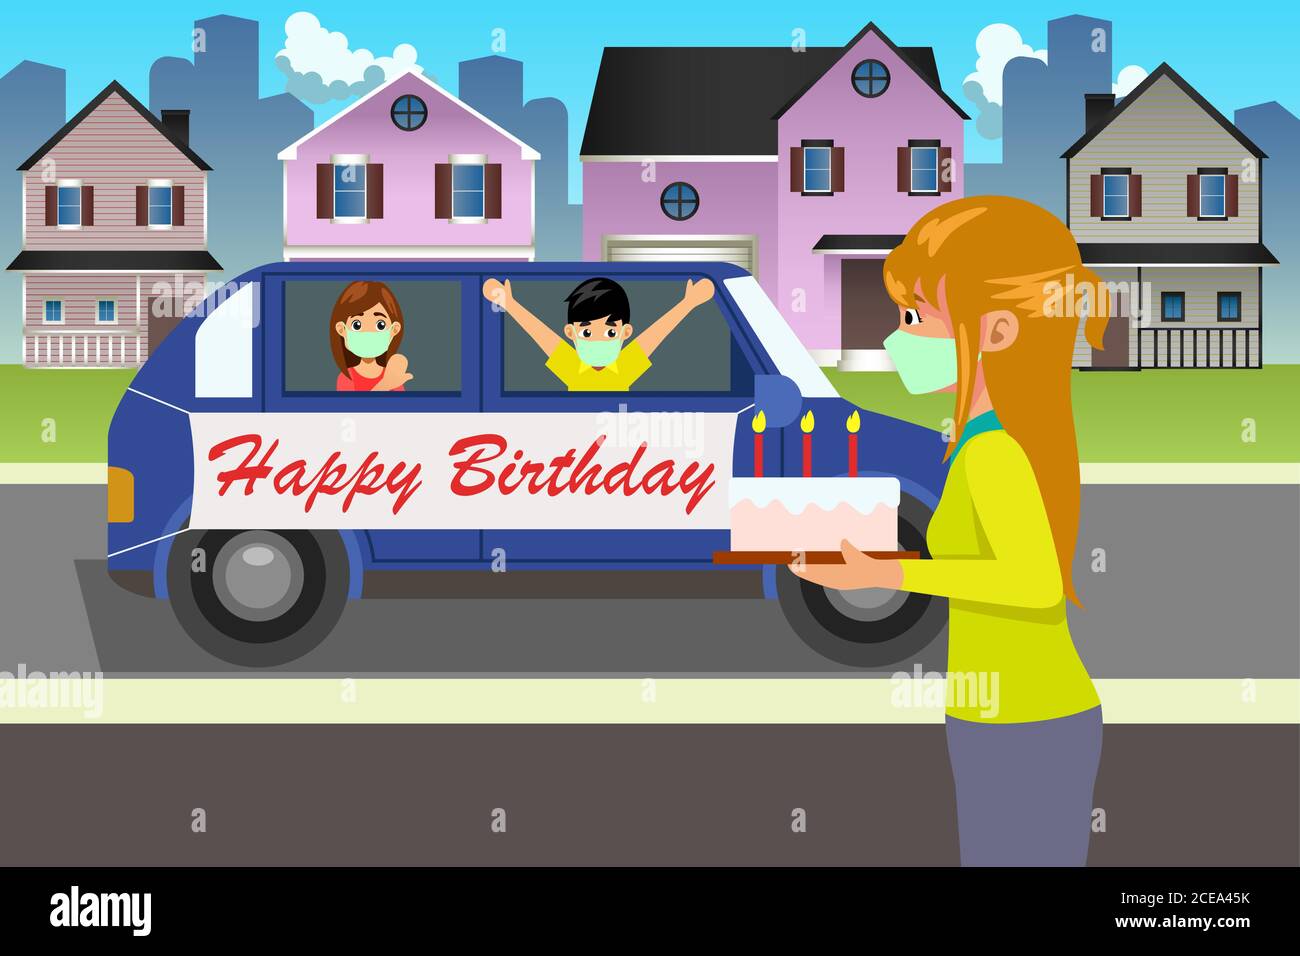 A vector illustration of Friends Celebrating Birthday During Pandemic Stock Vector